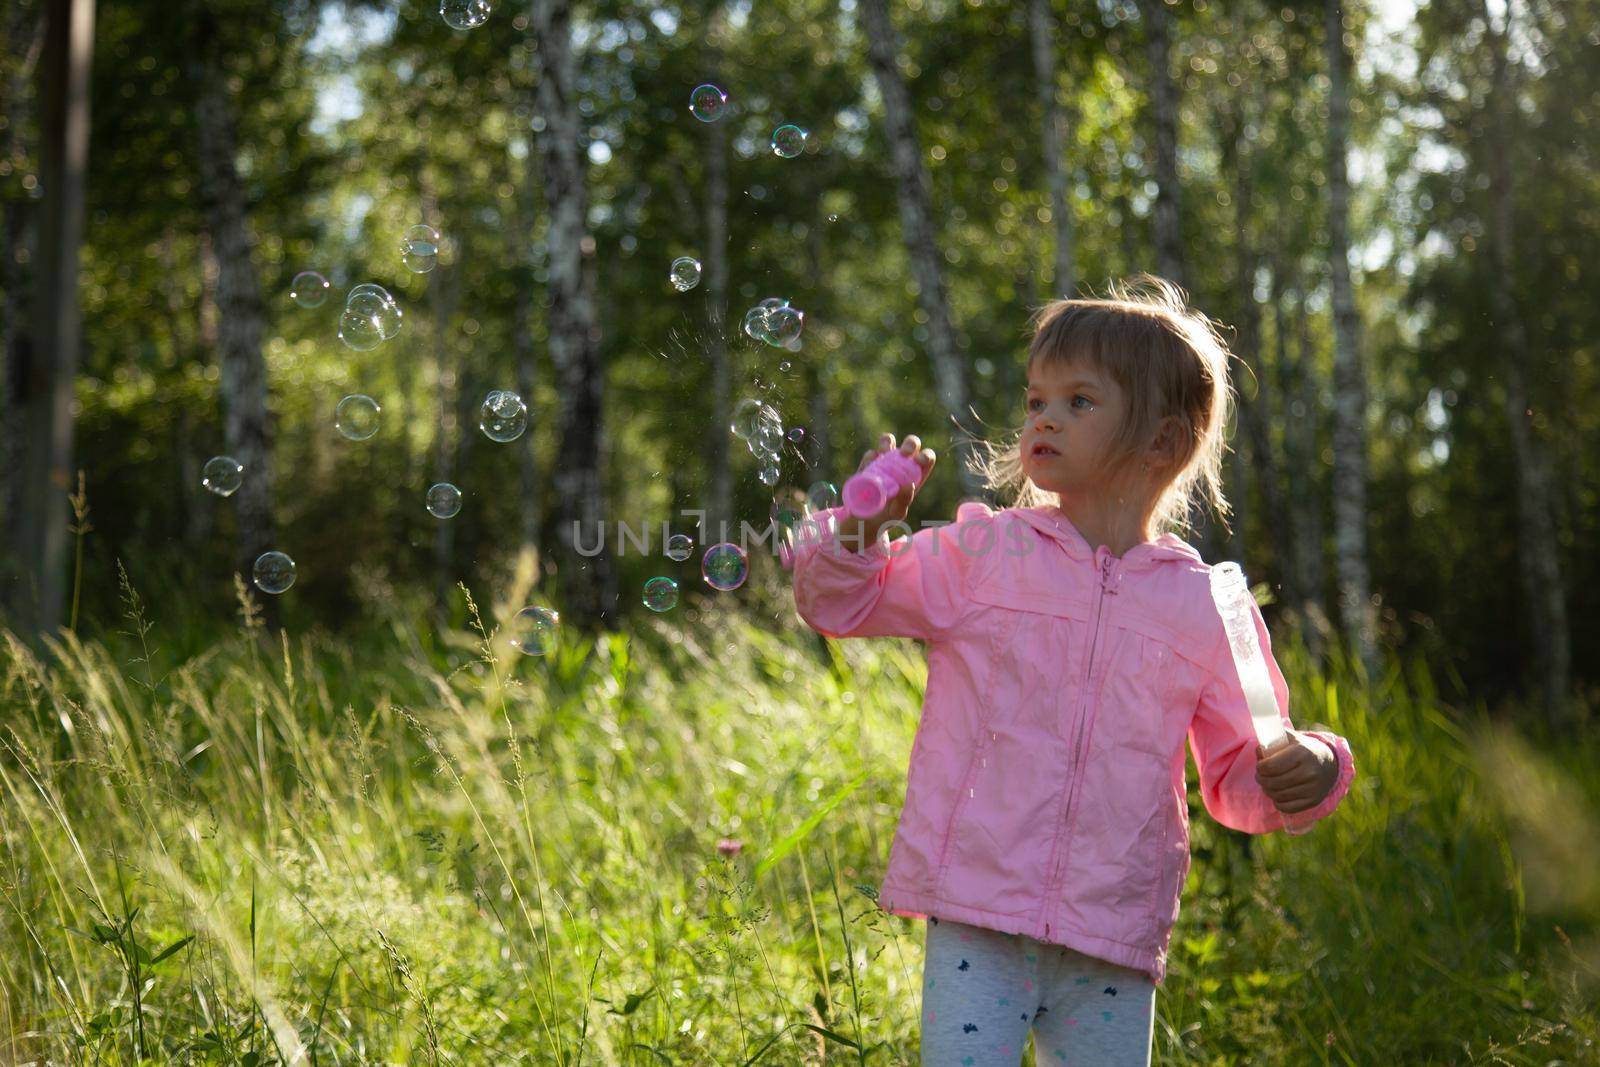 Little girl blowing soap bubbles in the forest by gordiza